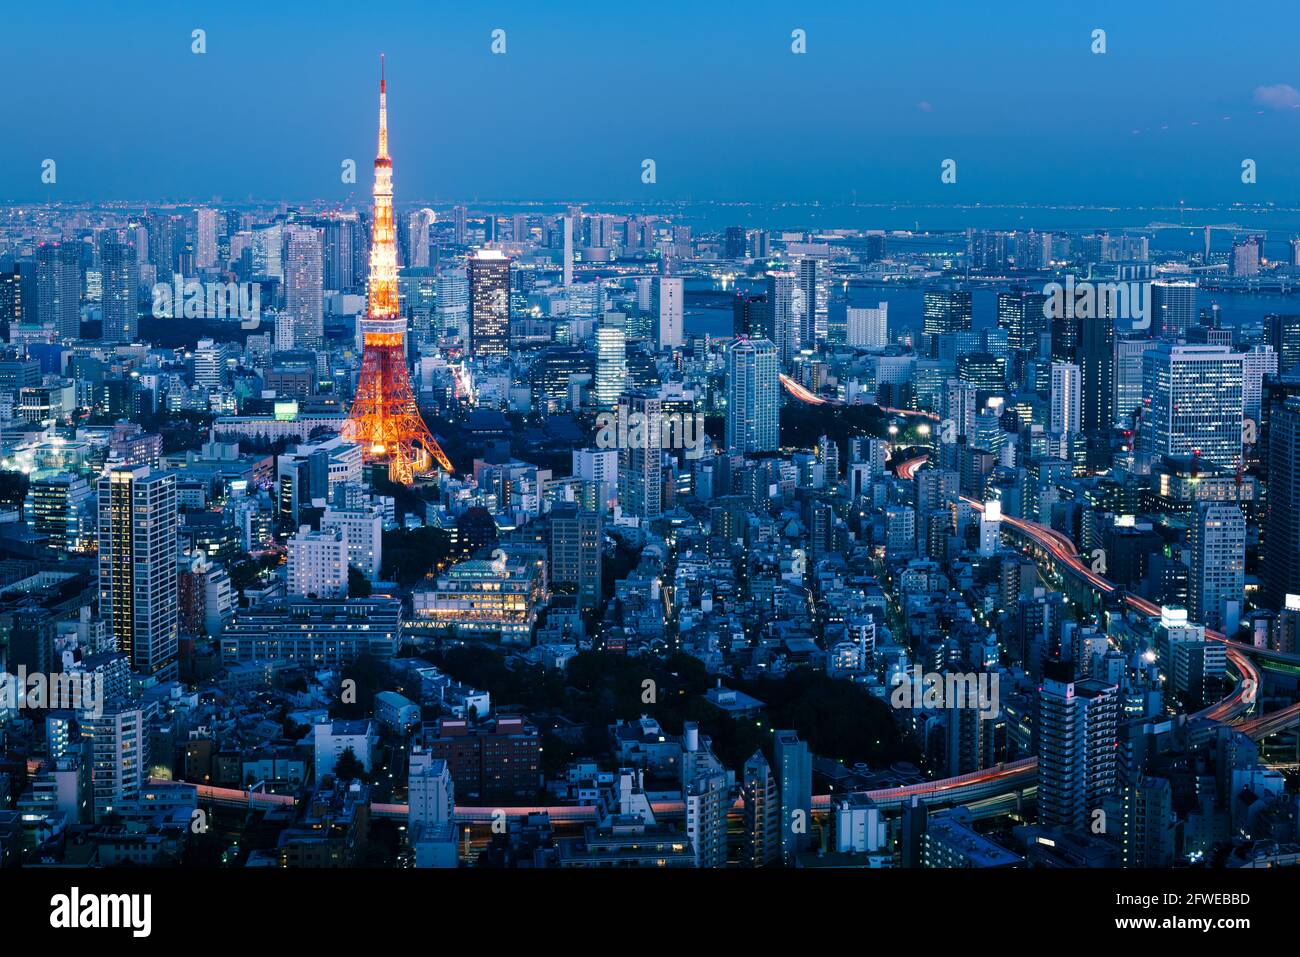 Tokyo, Japan - January 14, 2016: Sunset view of Tokyo Skylines with the Tokyo Tower. Tokyo is both the capital and largest city of Japan. Stock Photo